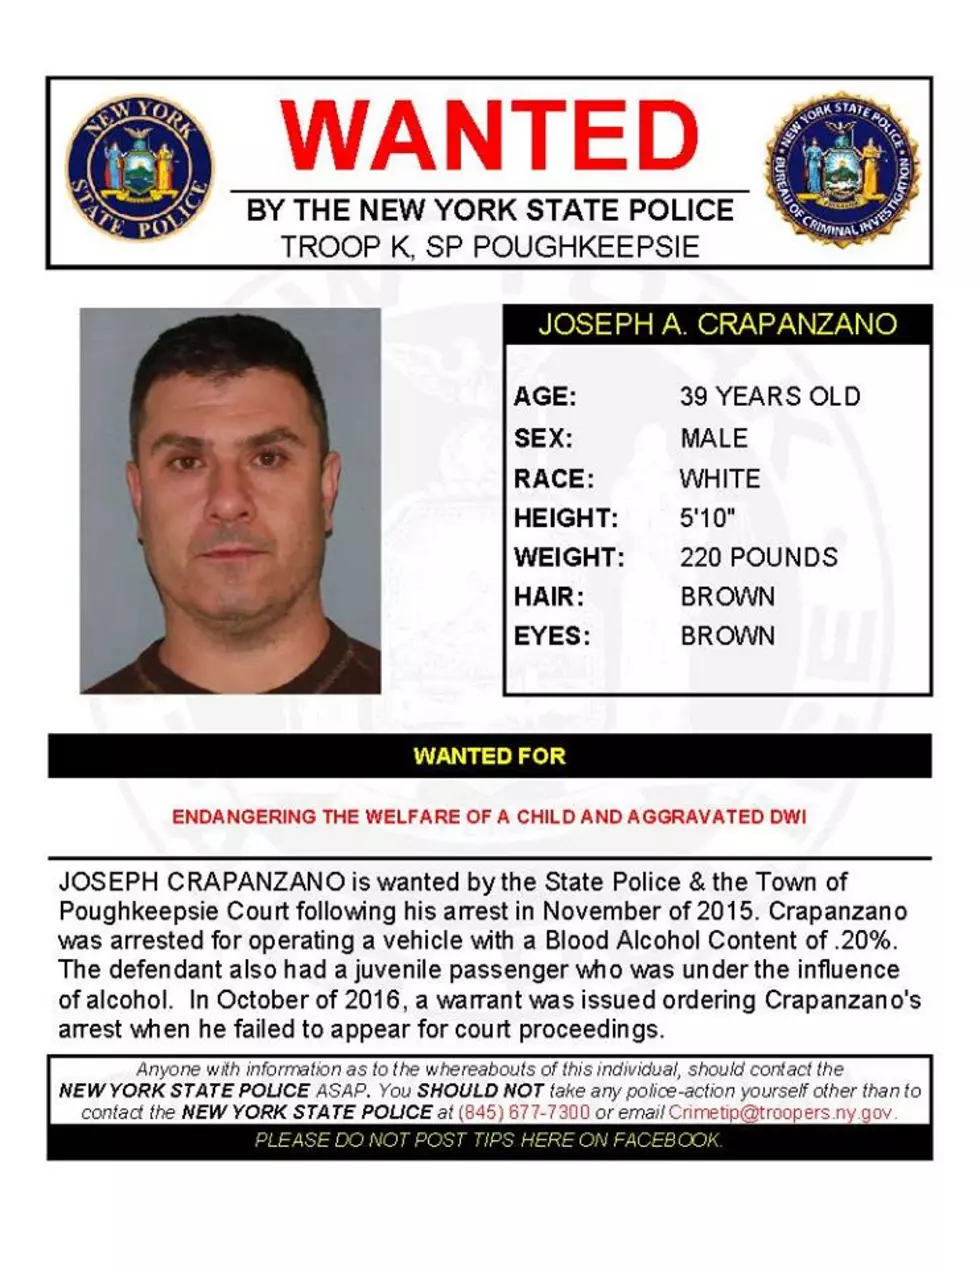 Warrant Wednesday: Dutchess County Man Wanted For Aggravated DWI and Endangering the Welfare of a Child